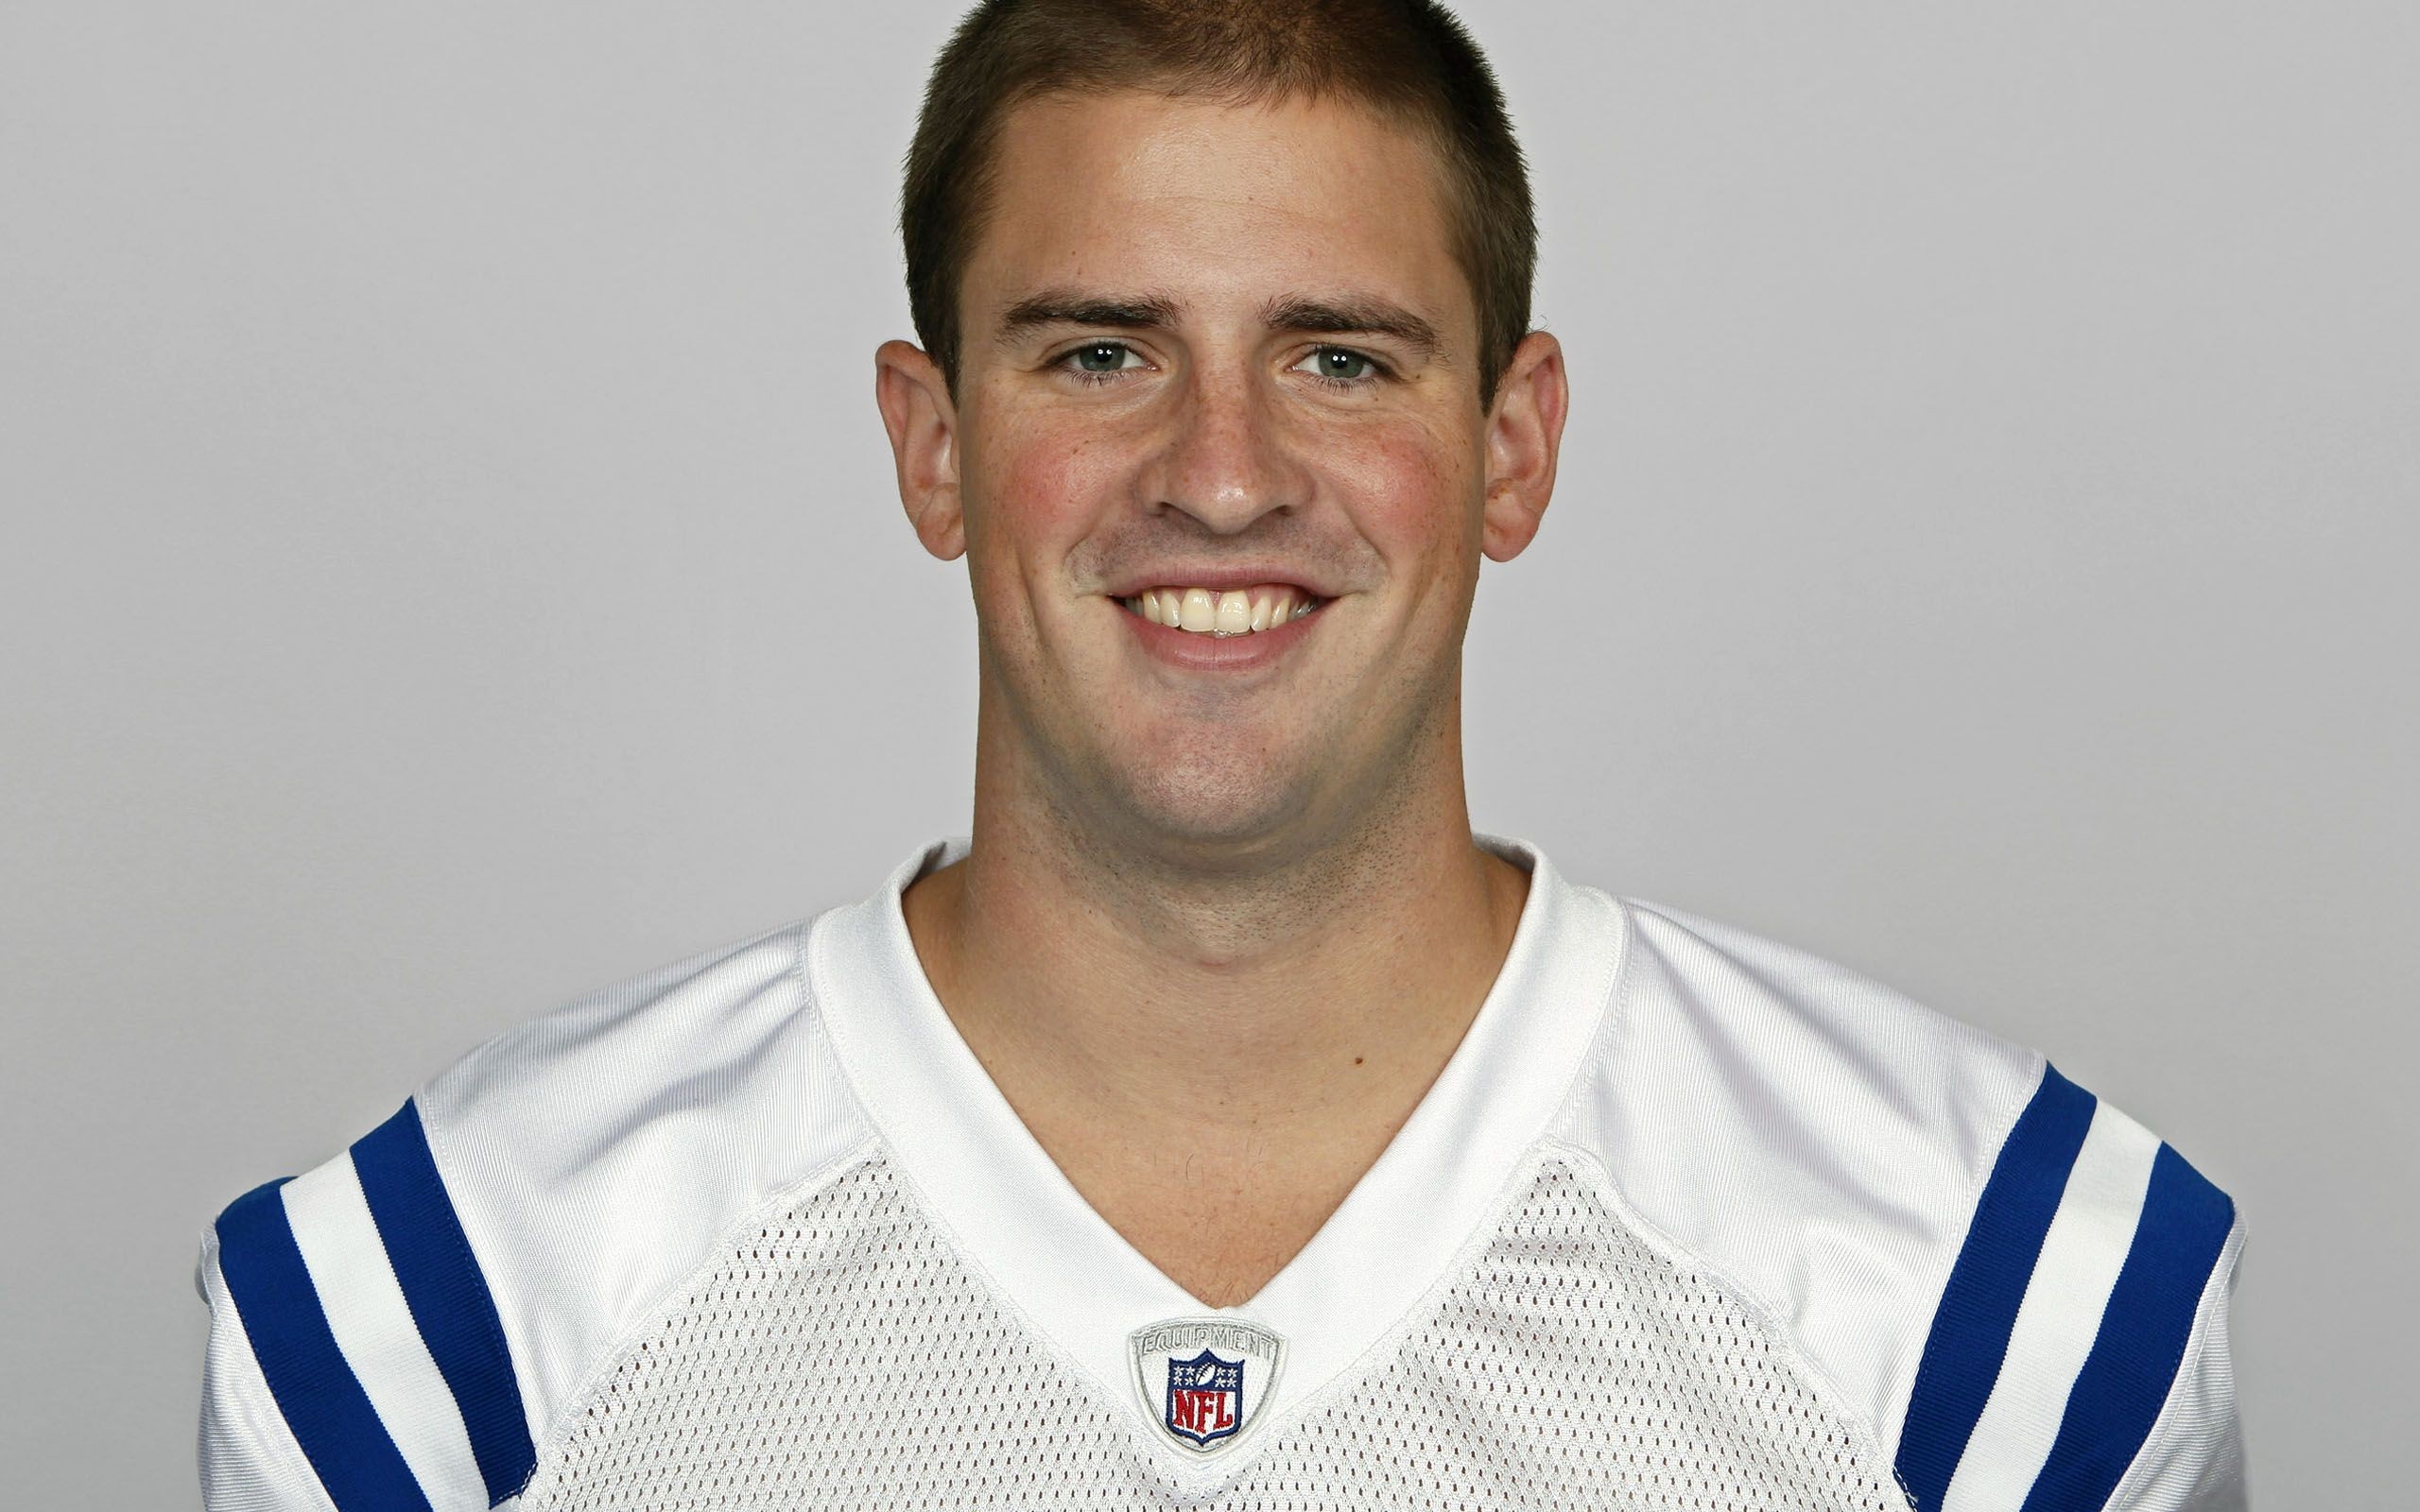 Indianapolis Colts Nfl American Football Tight End Rob Myers